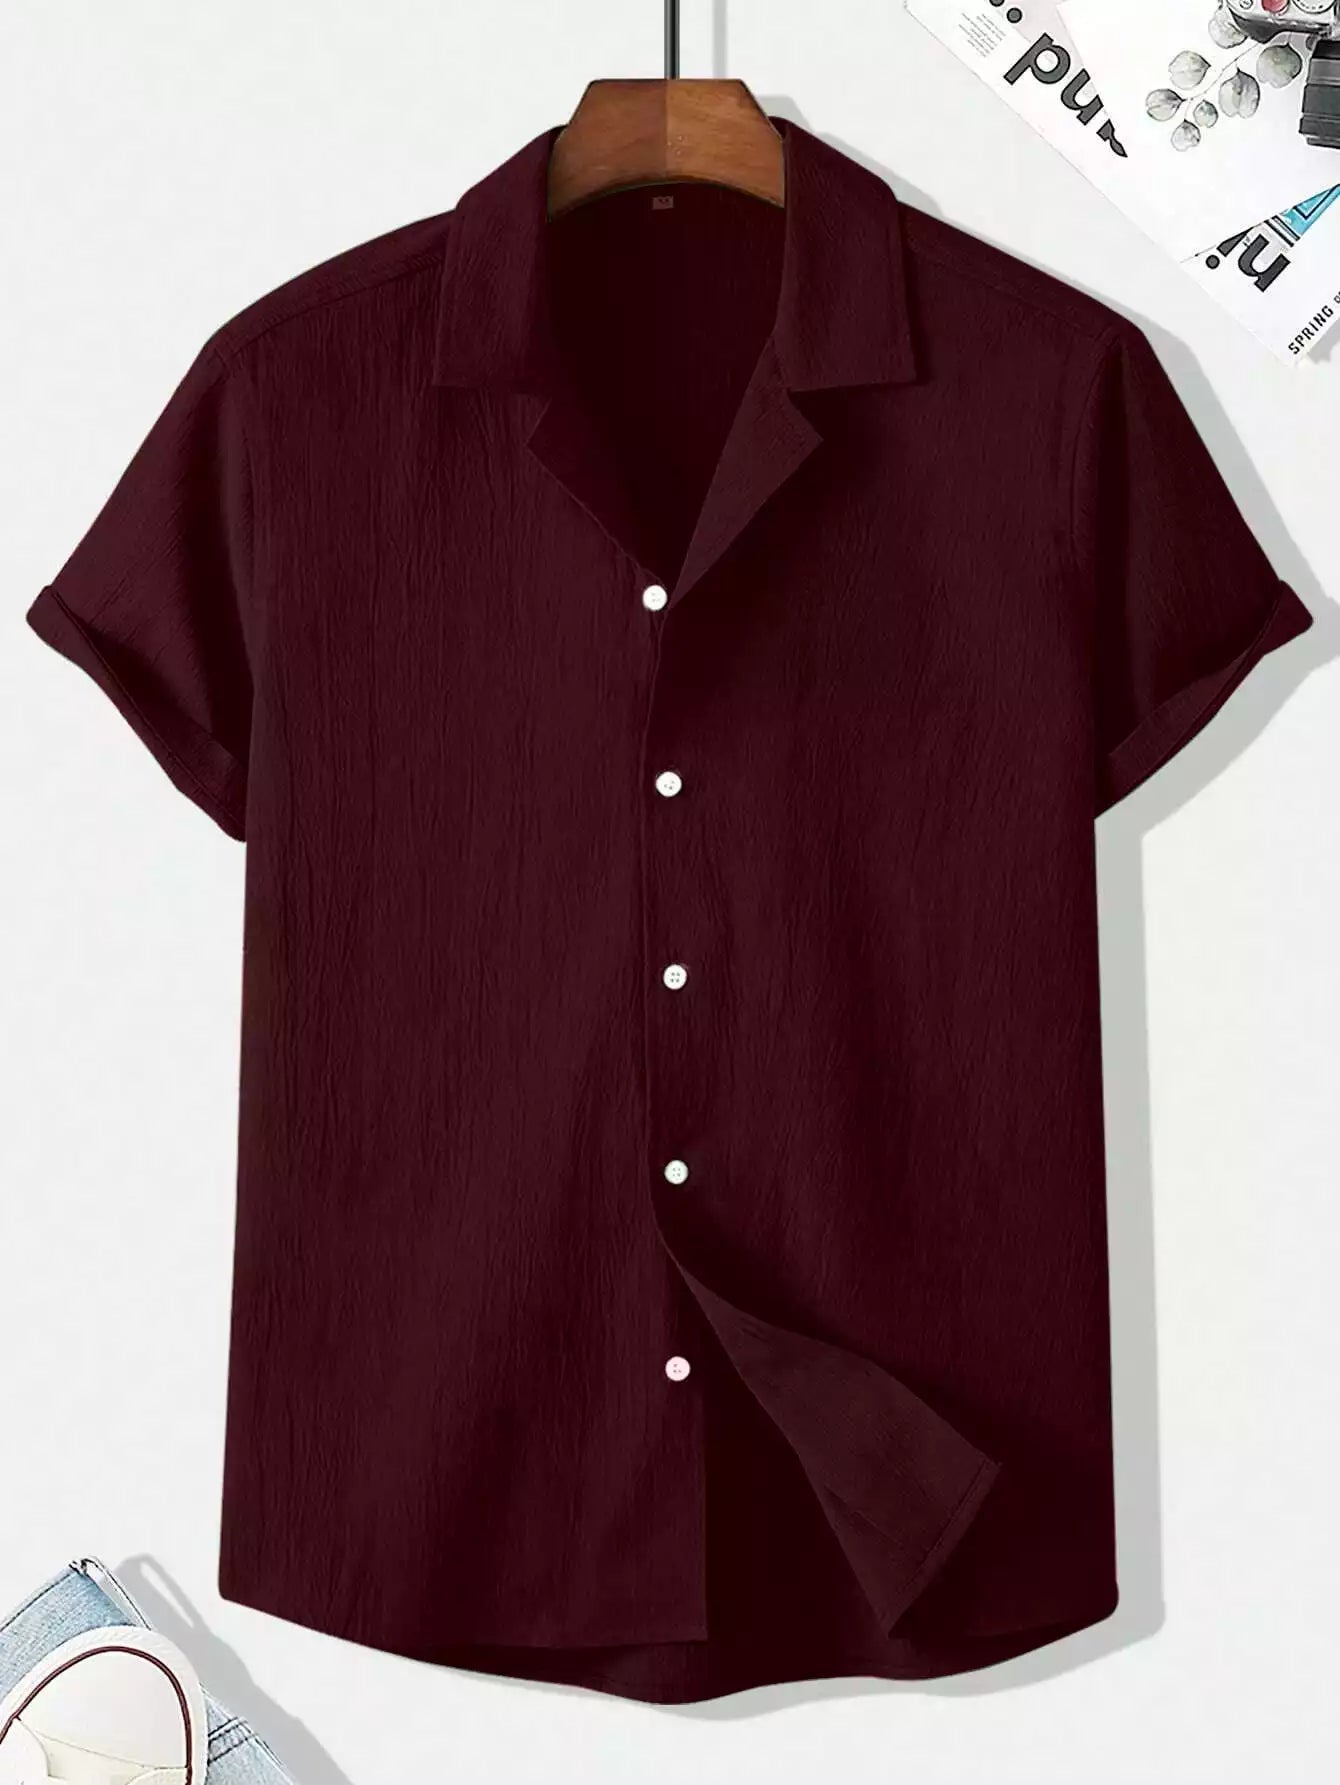 Plain Pattern Maroon Color Men's Simple  Cotton Casual Shirt Half Sleeve available